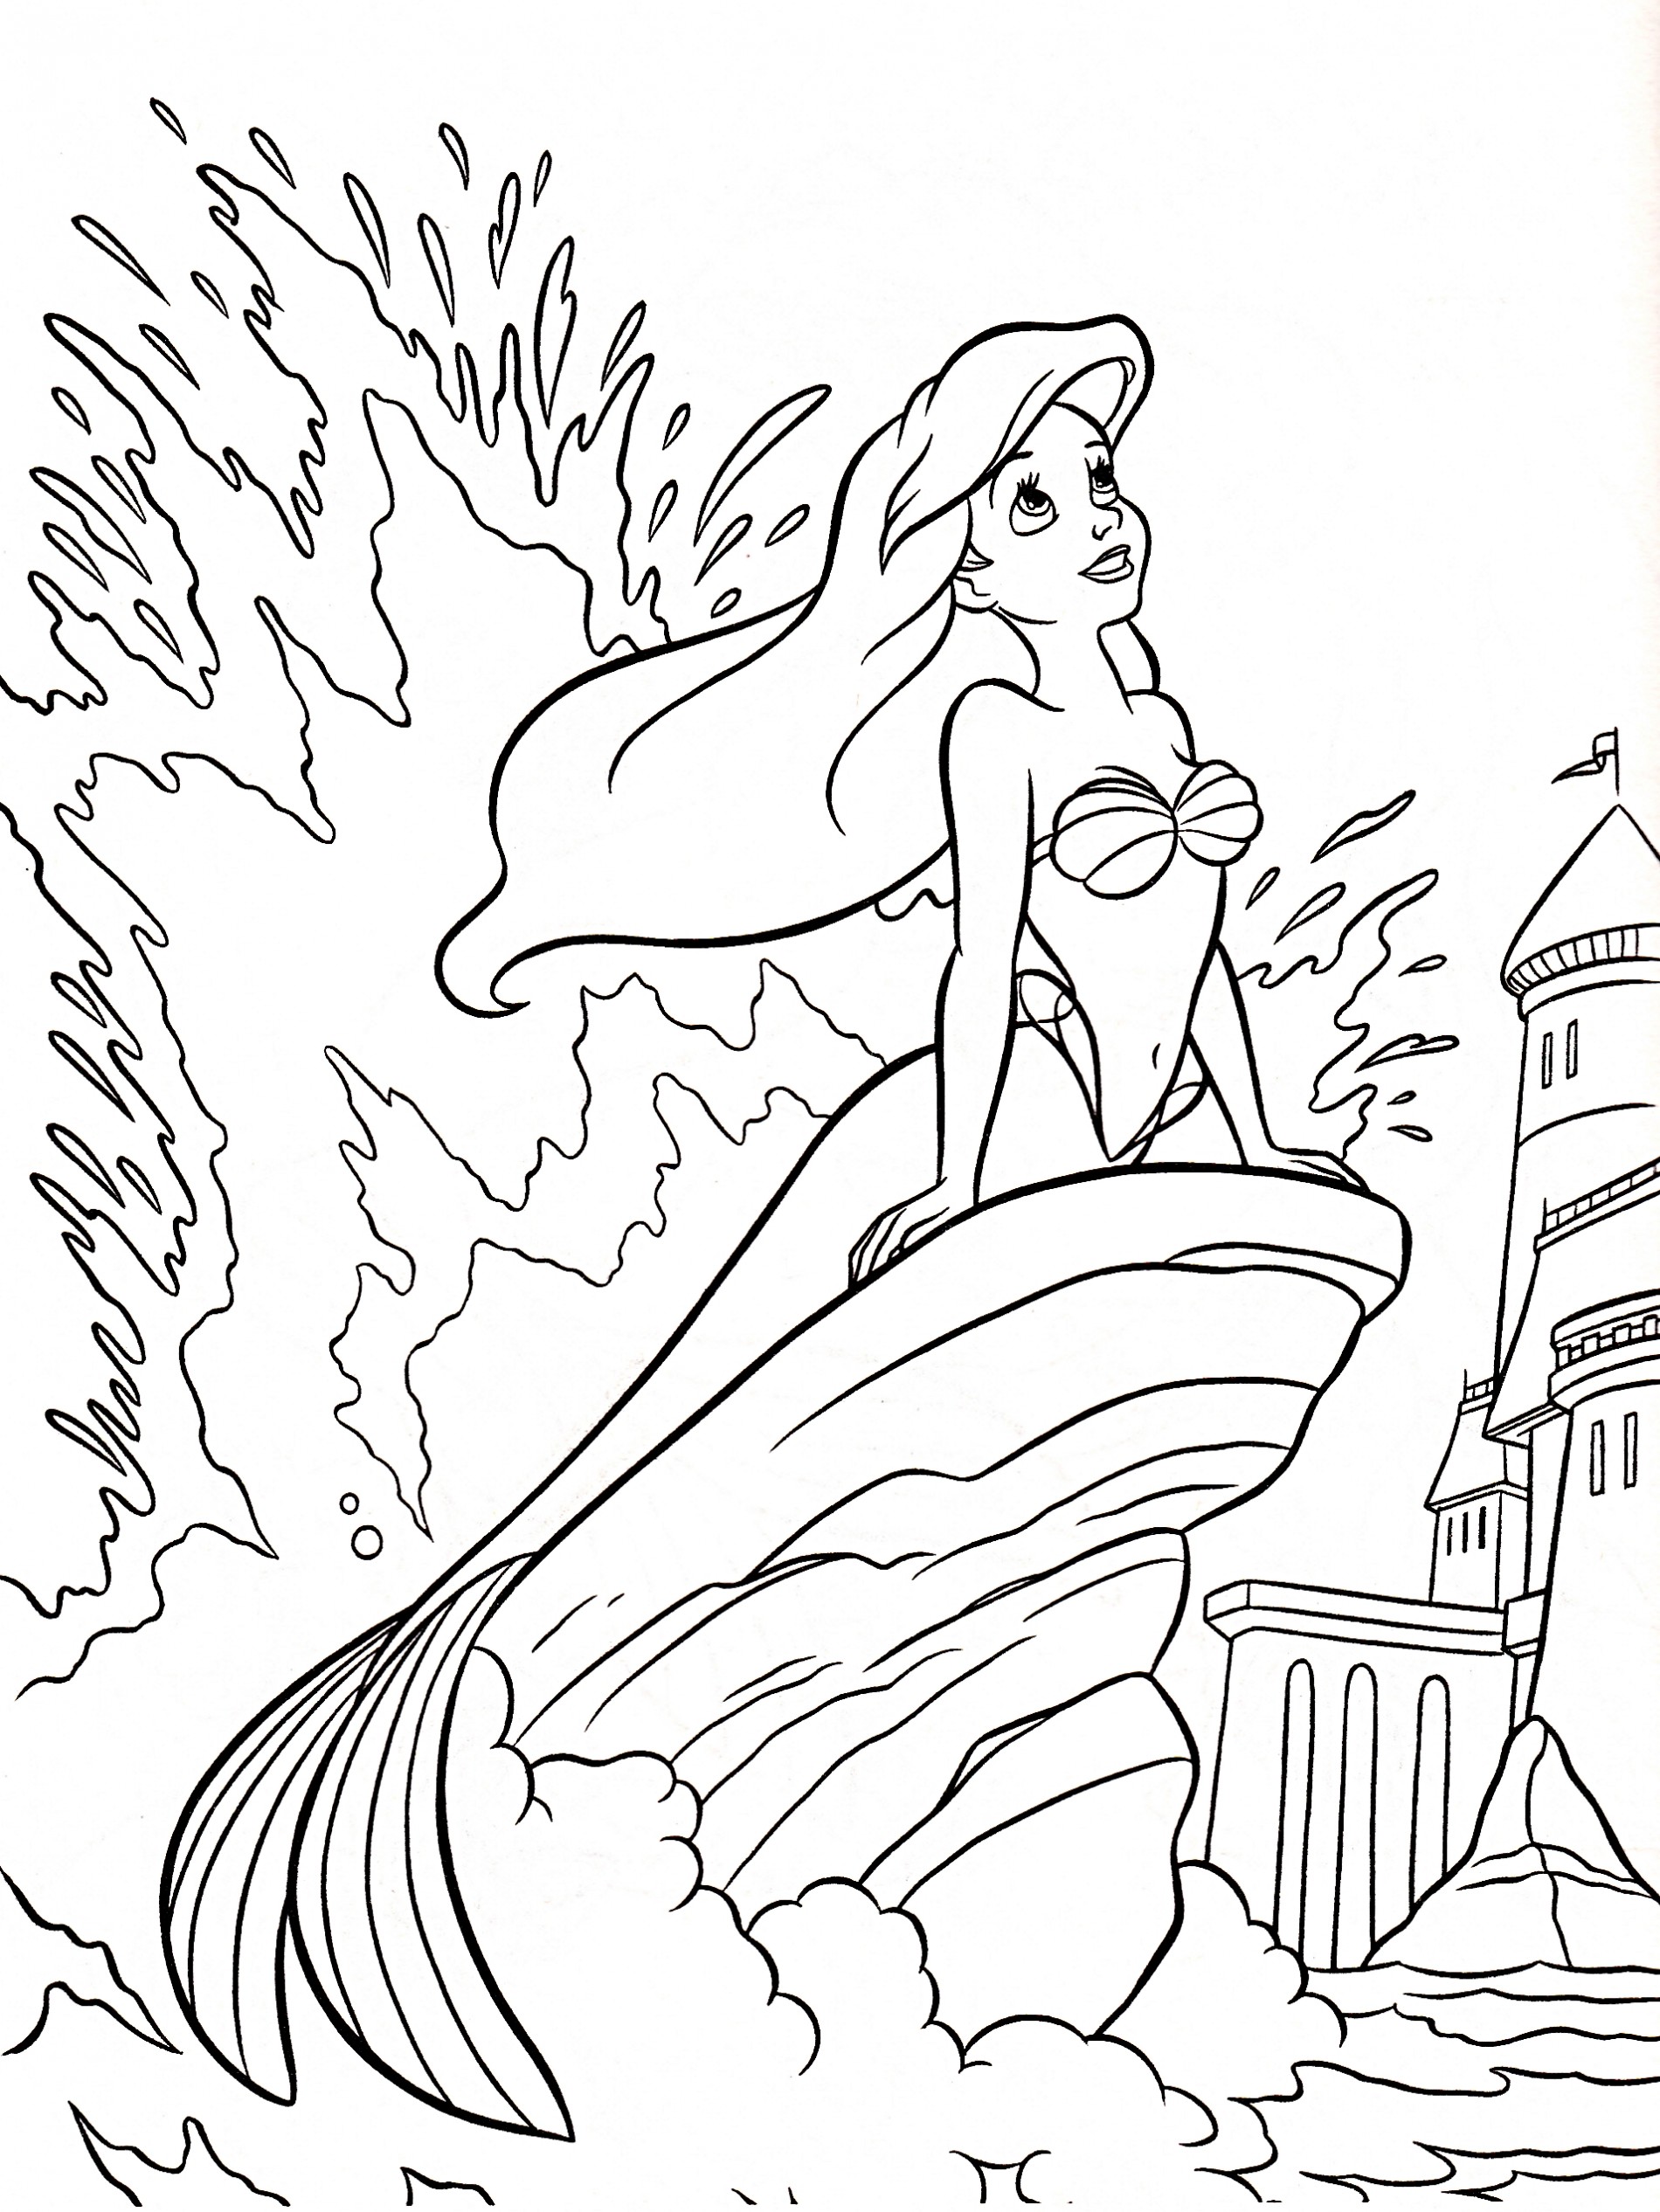 the-little-mermaid-coloring-pages-to-download-and-print-for-free